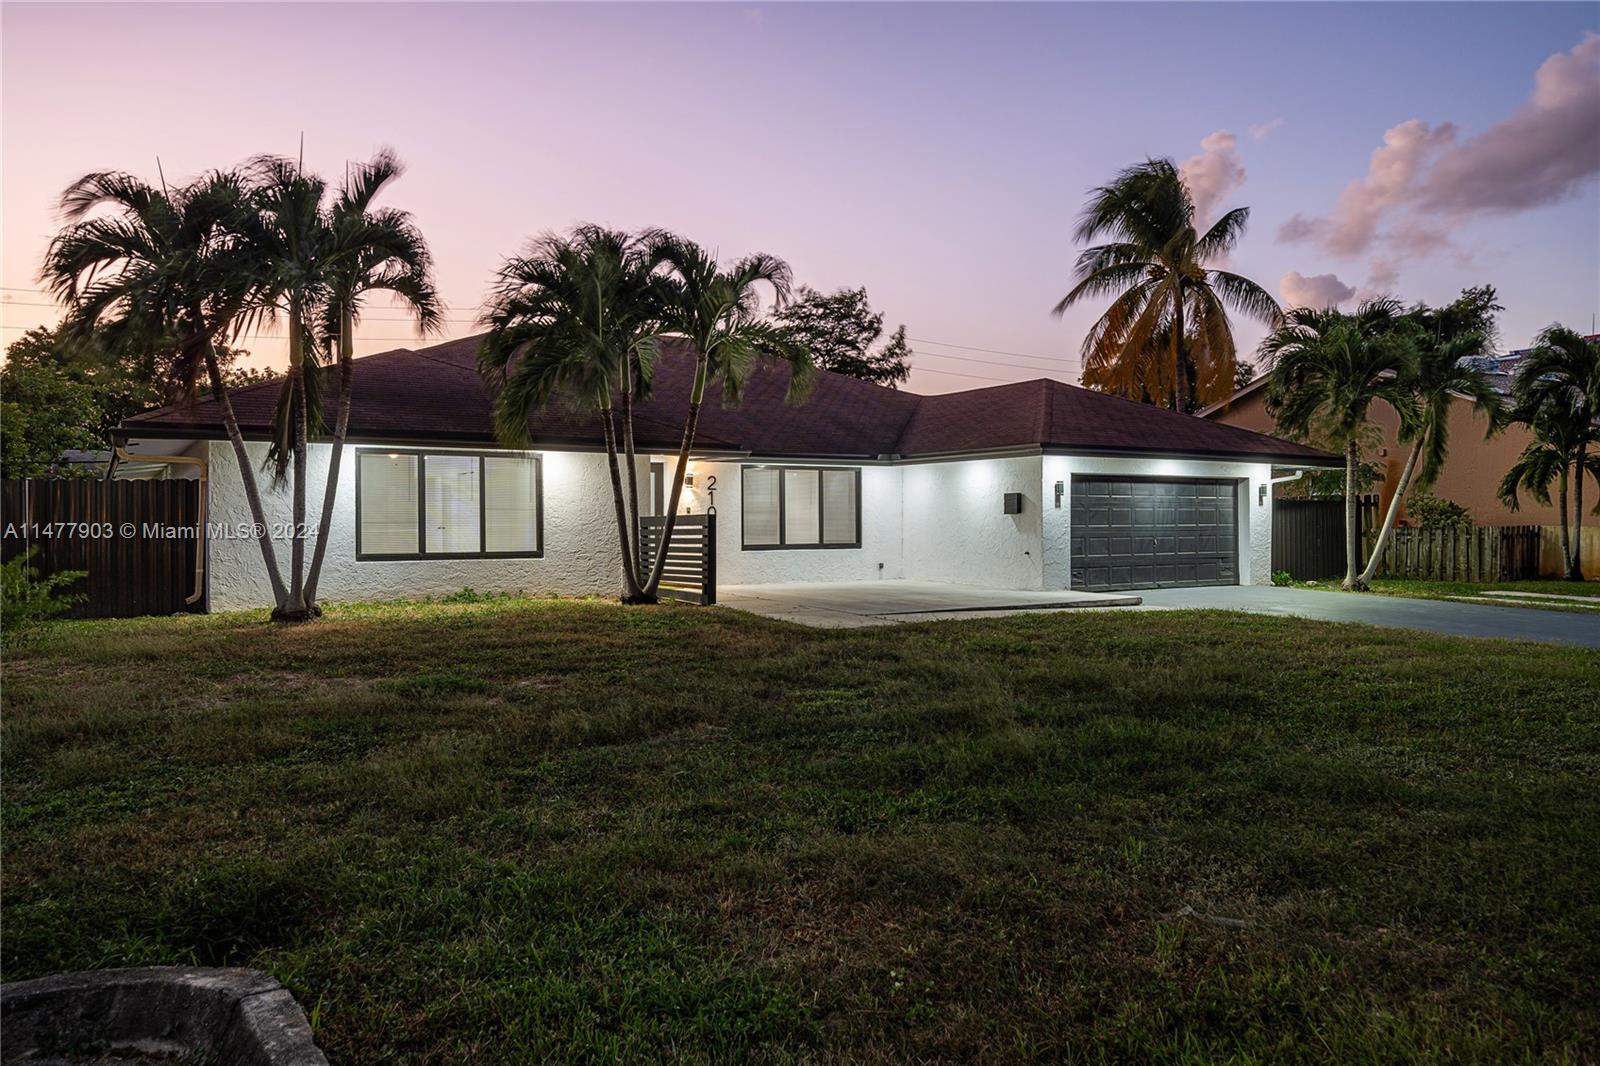 2101 Nw 14th Ave, Fort Lauderdale, Broward County, Florida - 4 Bedrooms  
4 Bathrooms - 